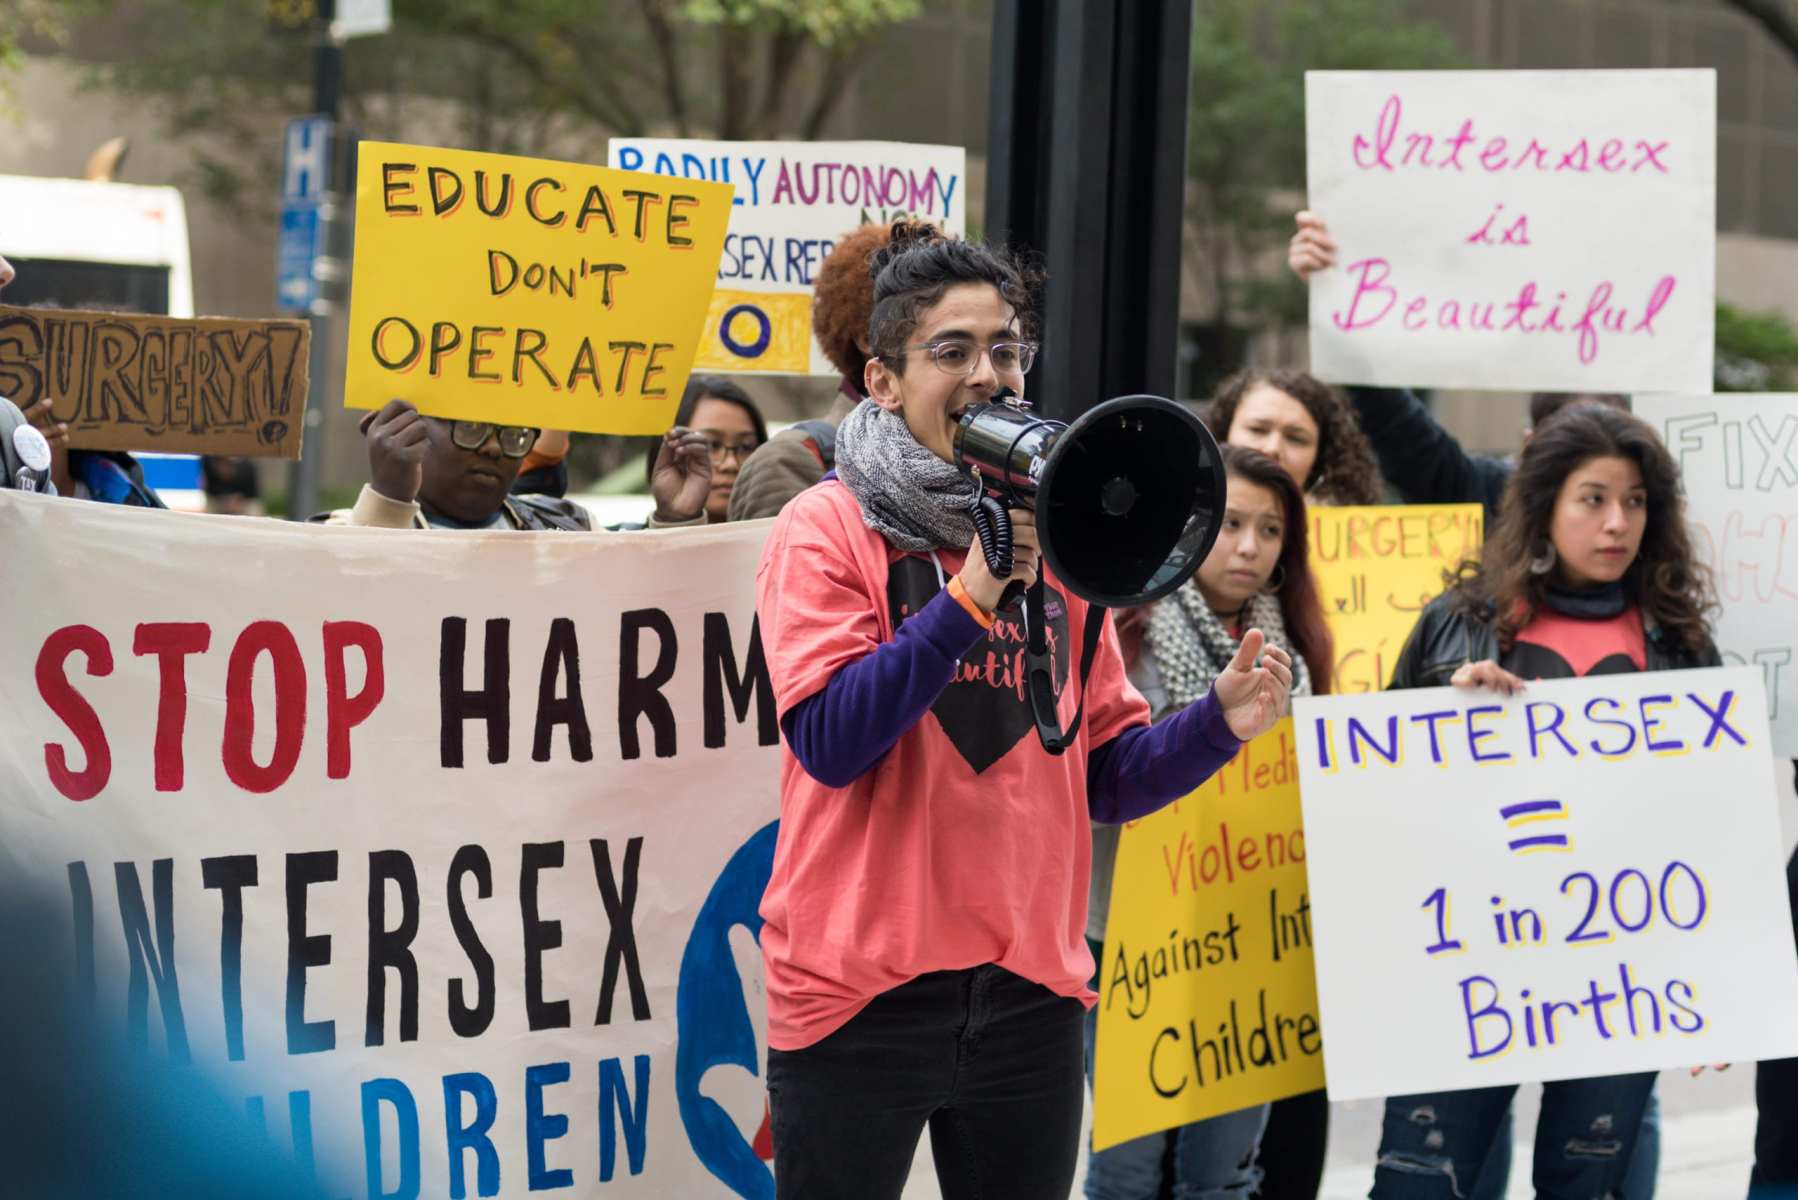 A person with a megaphone at a protest.